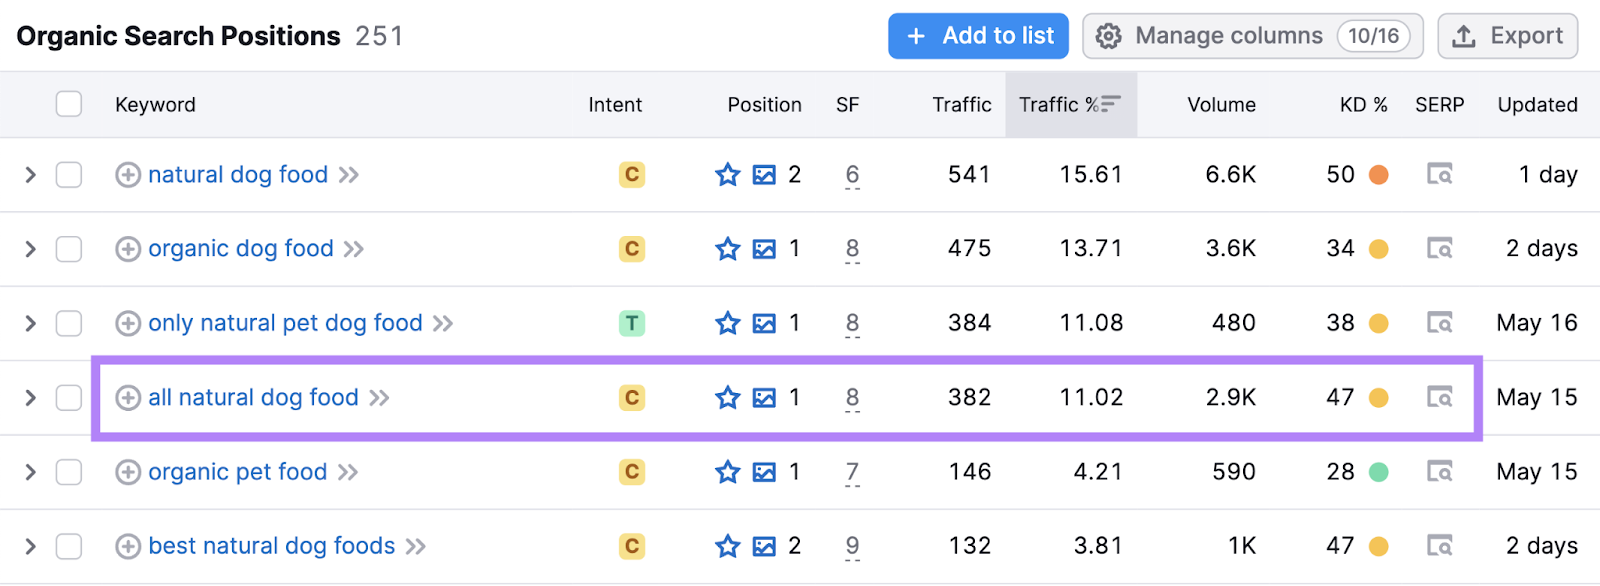 organic search positions report shows keyword traffic data